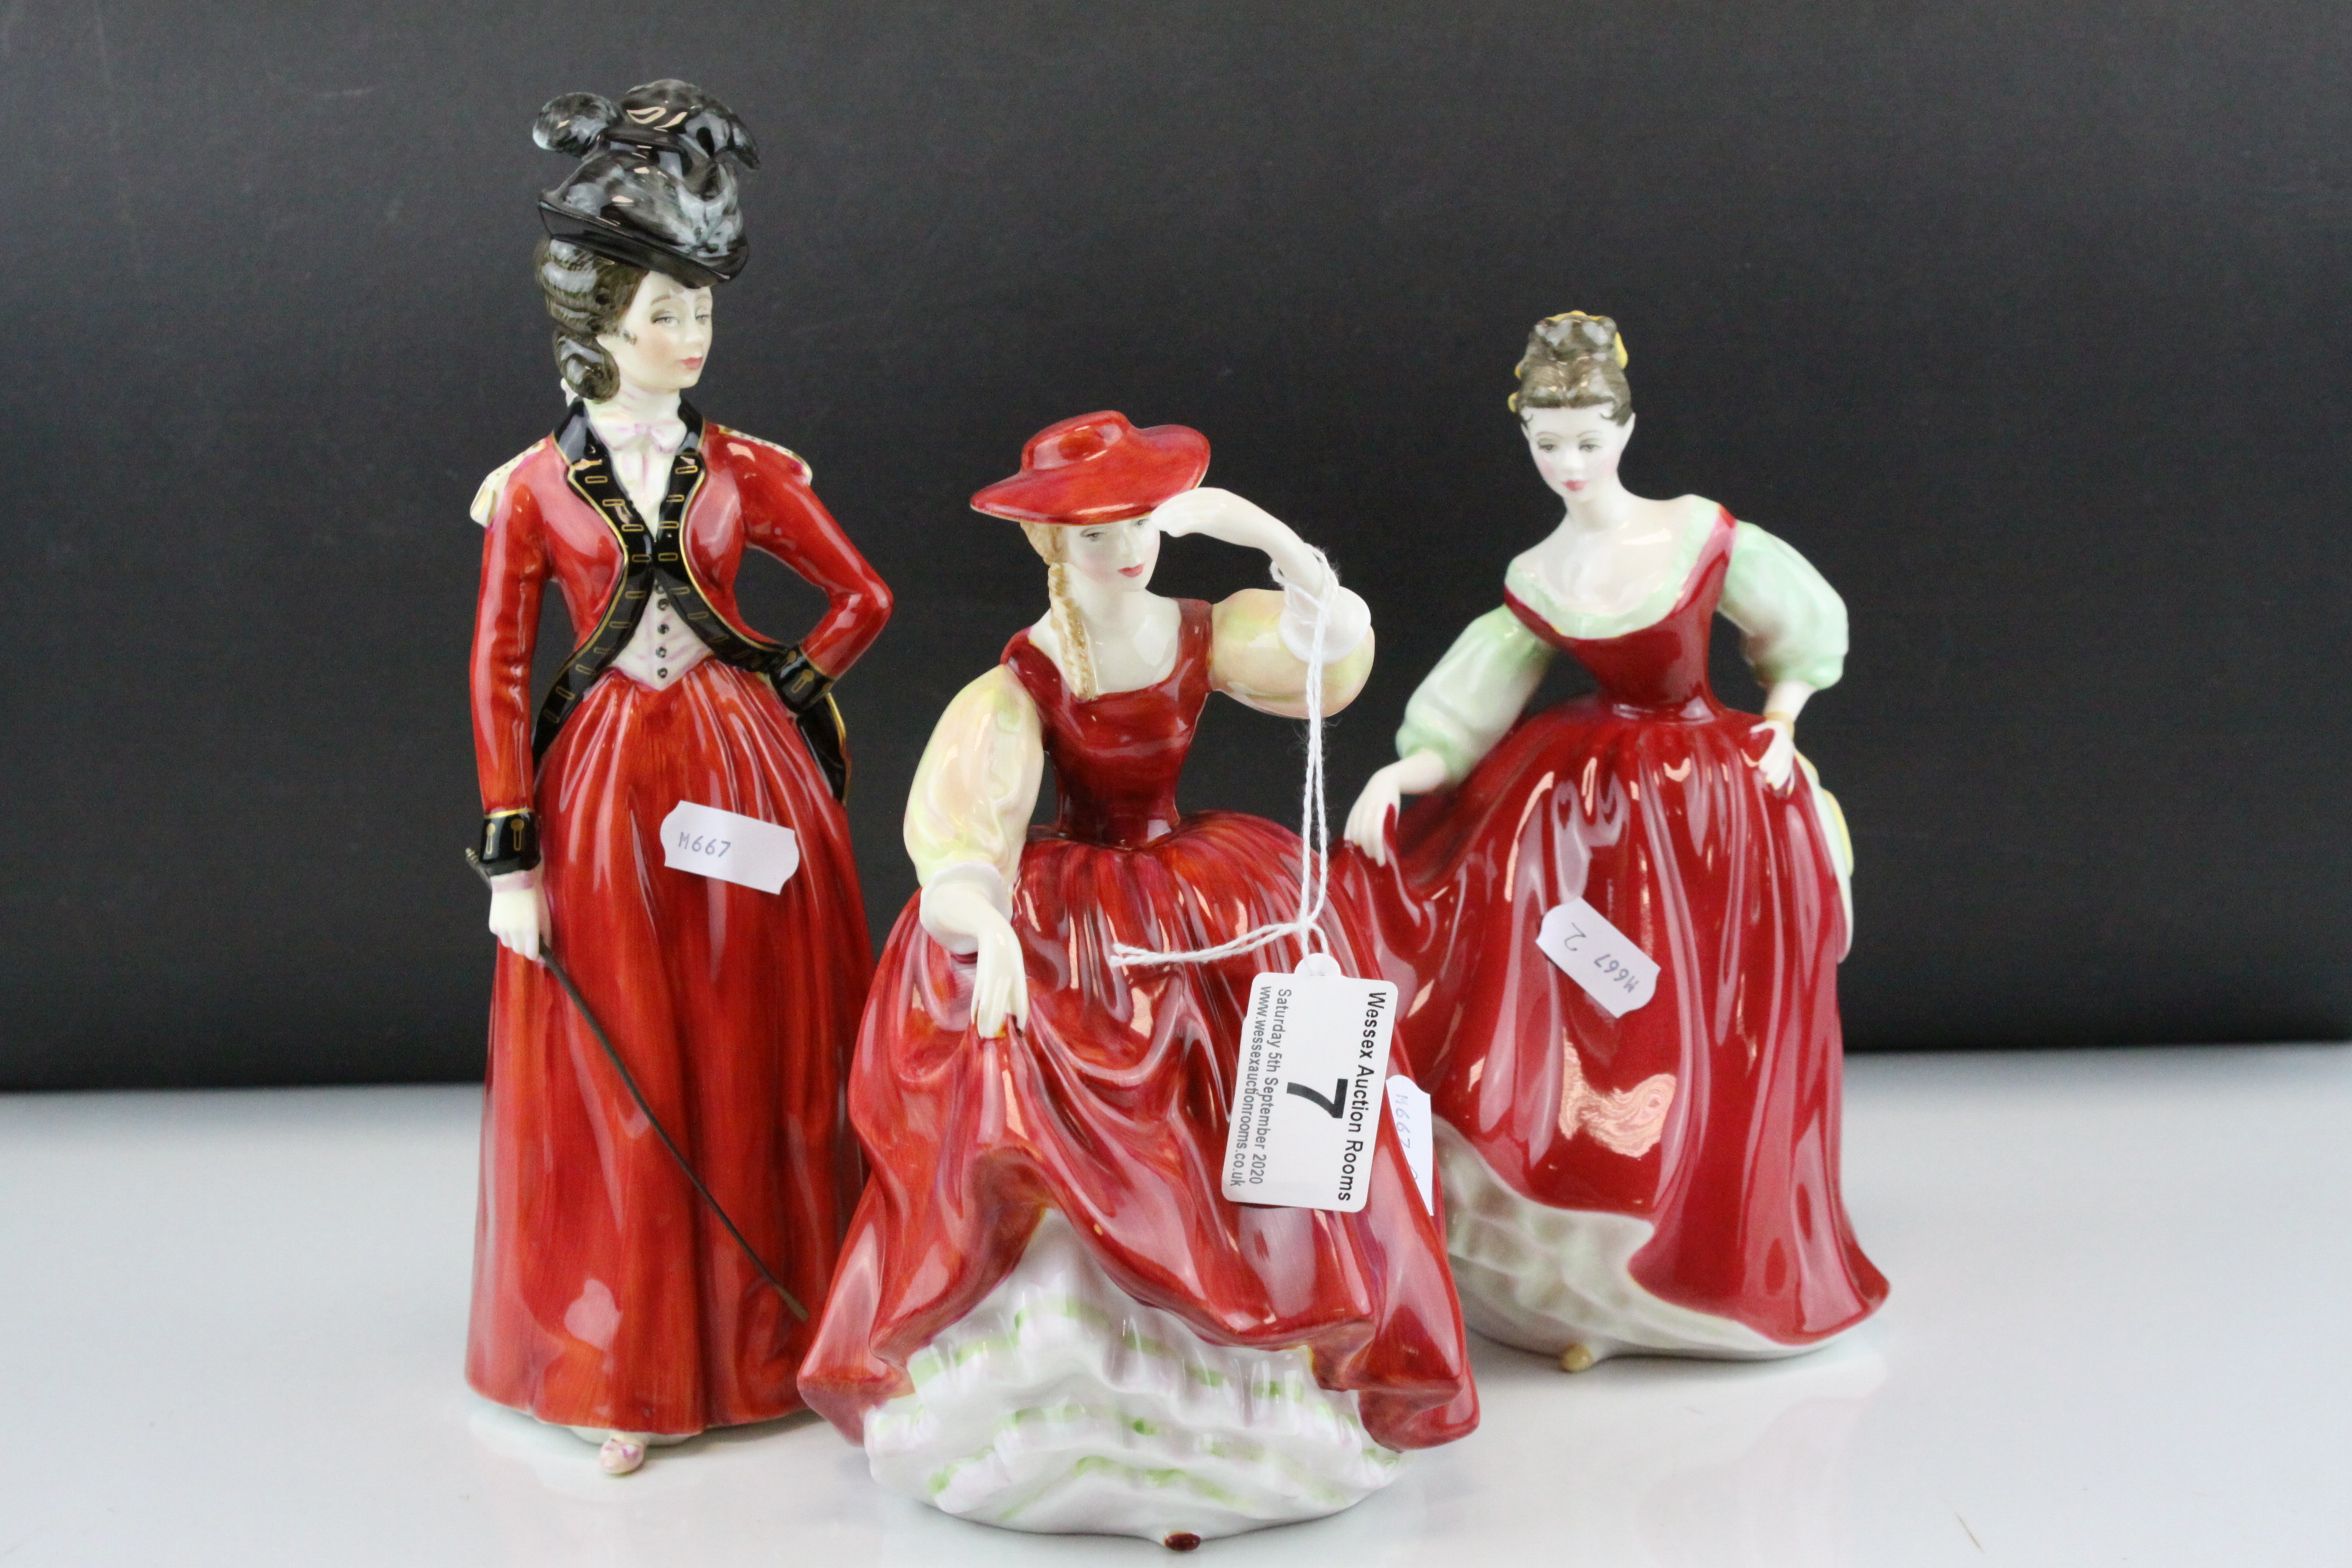 Three Royal Doulton Figurines - Buttercup, Fair Lady and Lady Worsley ( limited edition no. 512 )